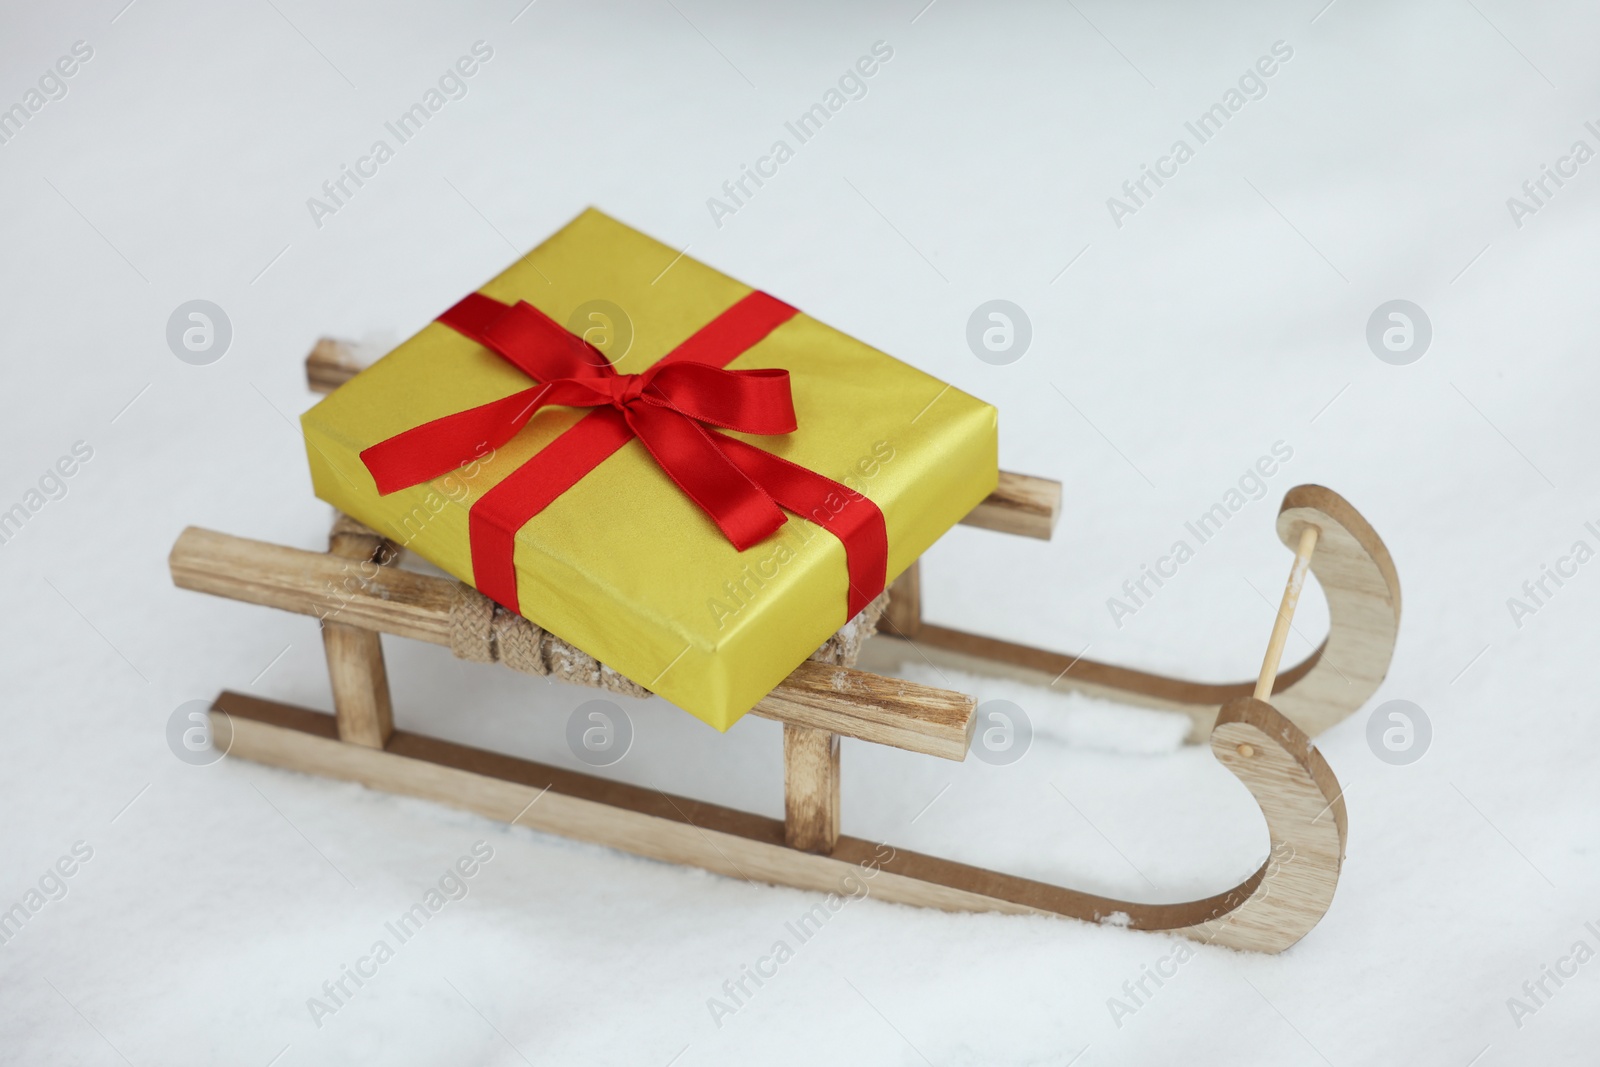 Photo of Wooden sleigh with gift box on snow outdoors